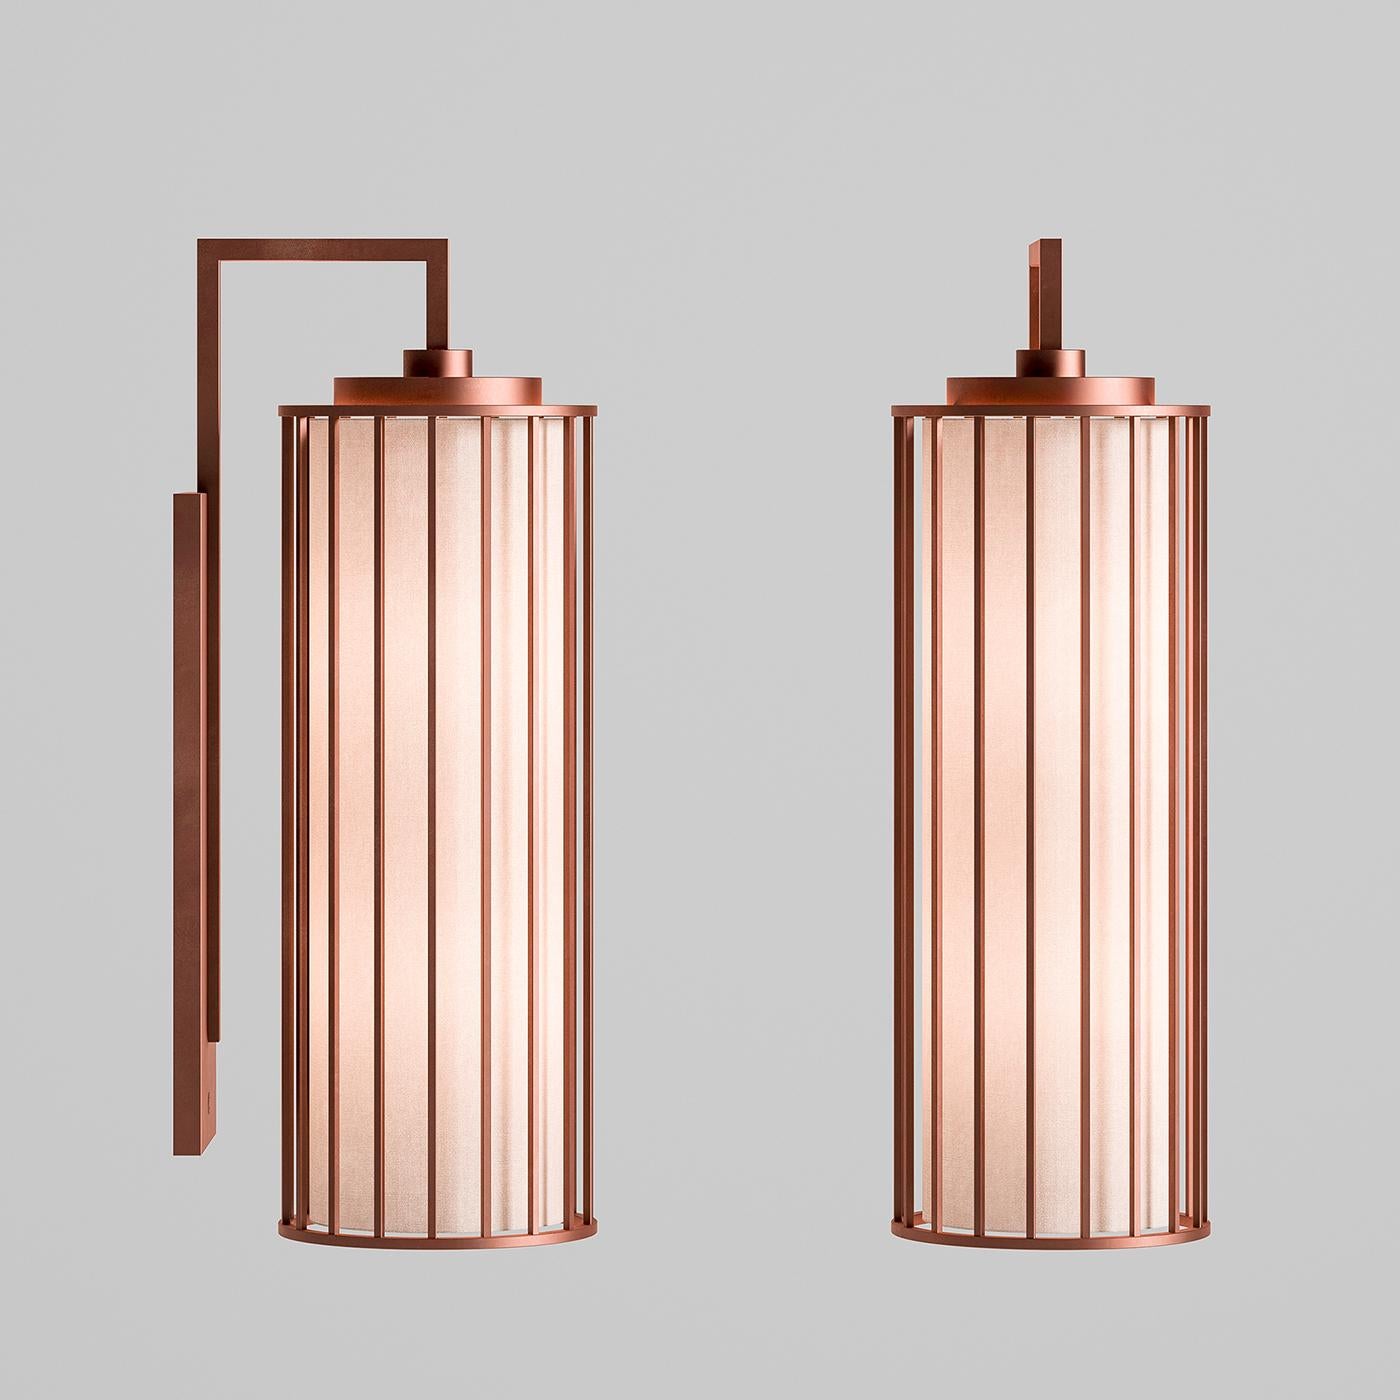 The unique aesthetic and subtle complexity of this singular sconce make it an exceptional statement piece for any modern or midcentury decor. Mounted on the wall with a slender rectangular metal plate, this exquisite lantern hangs from an angled arm